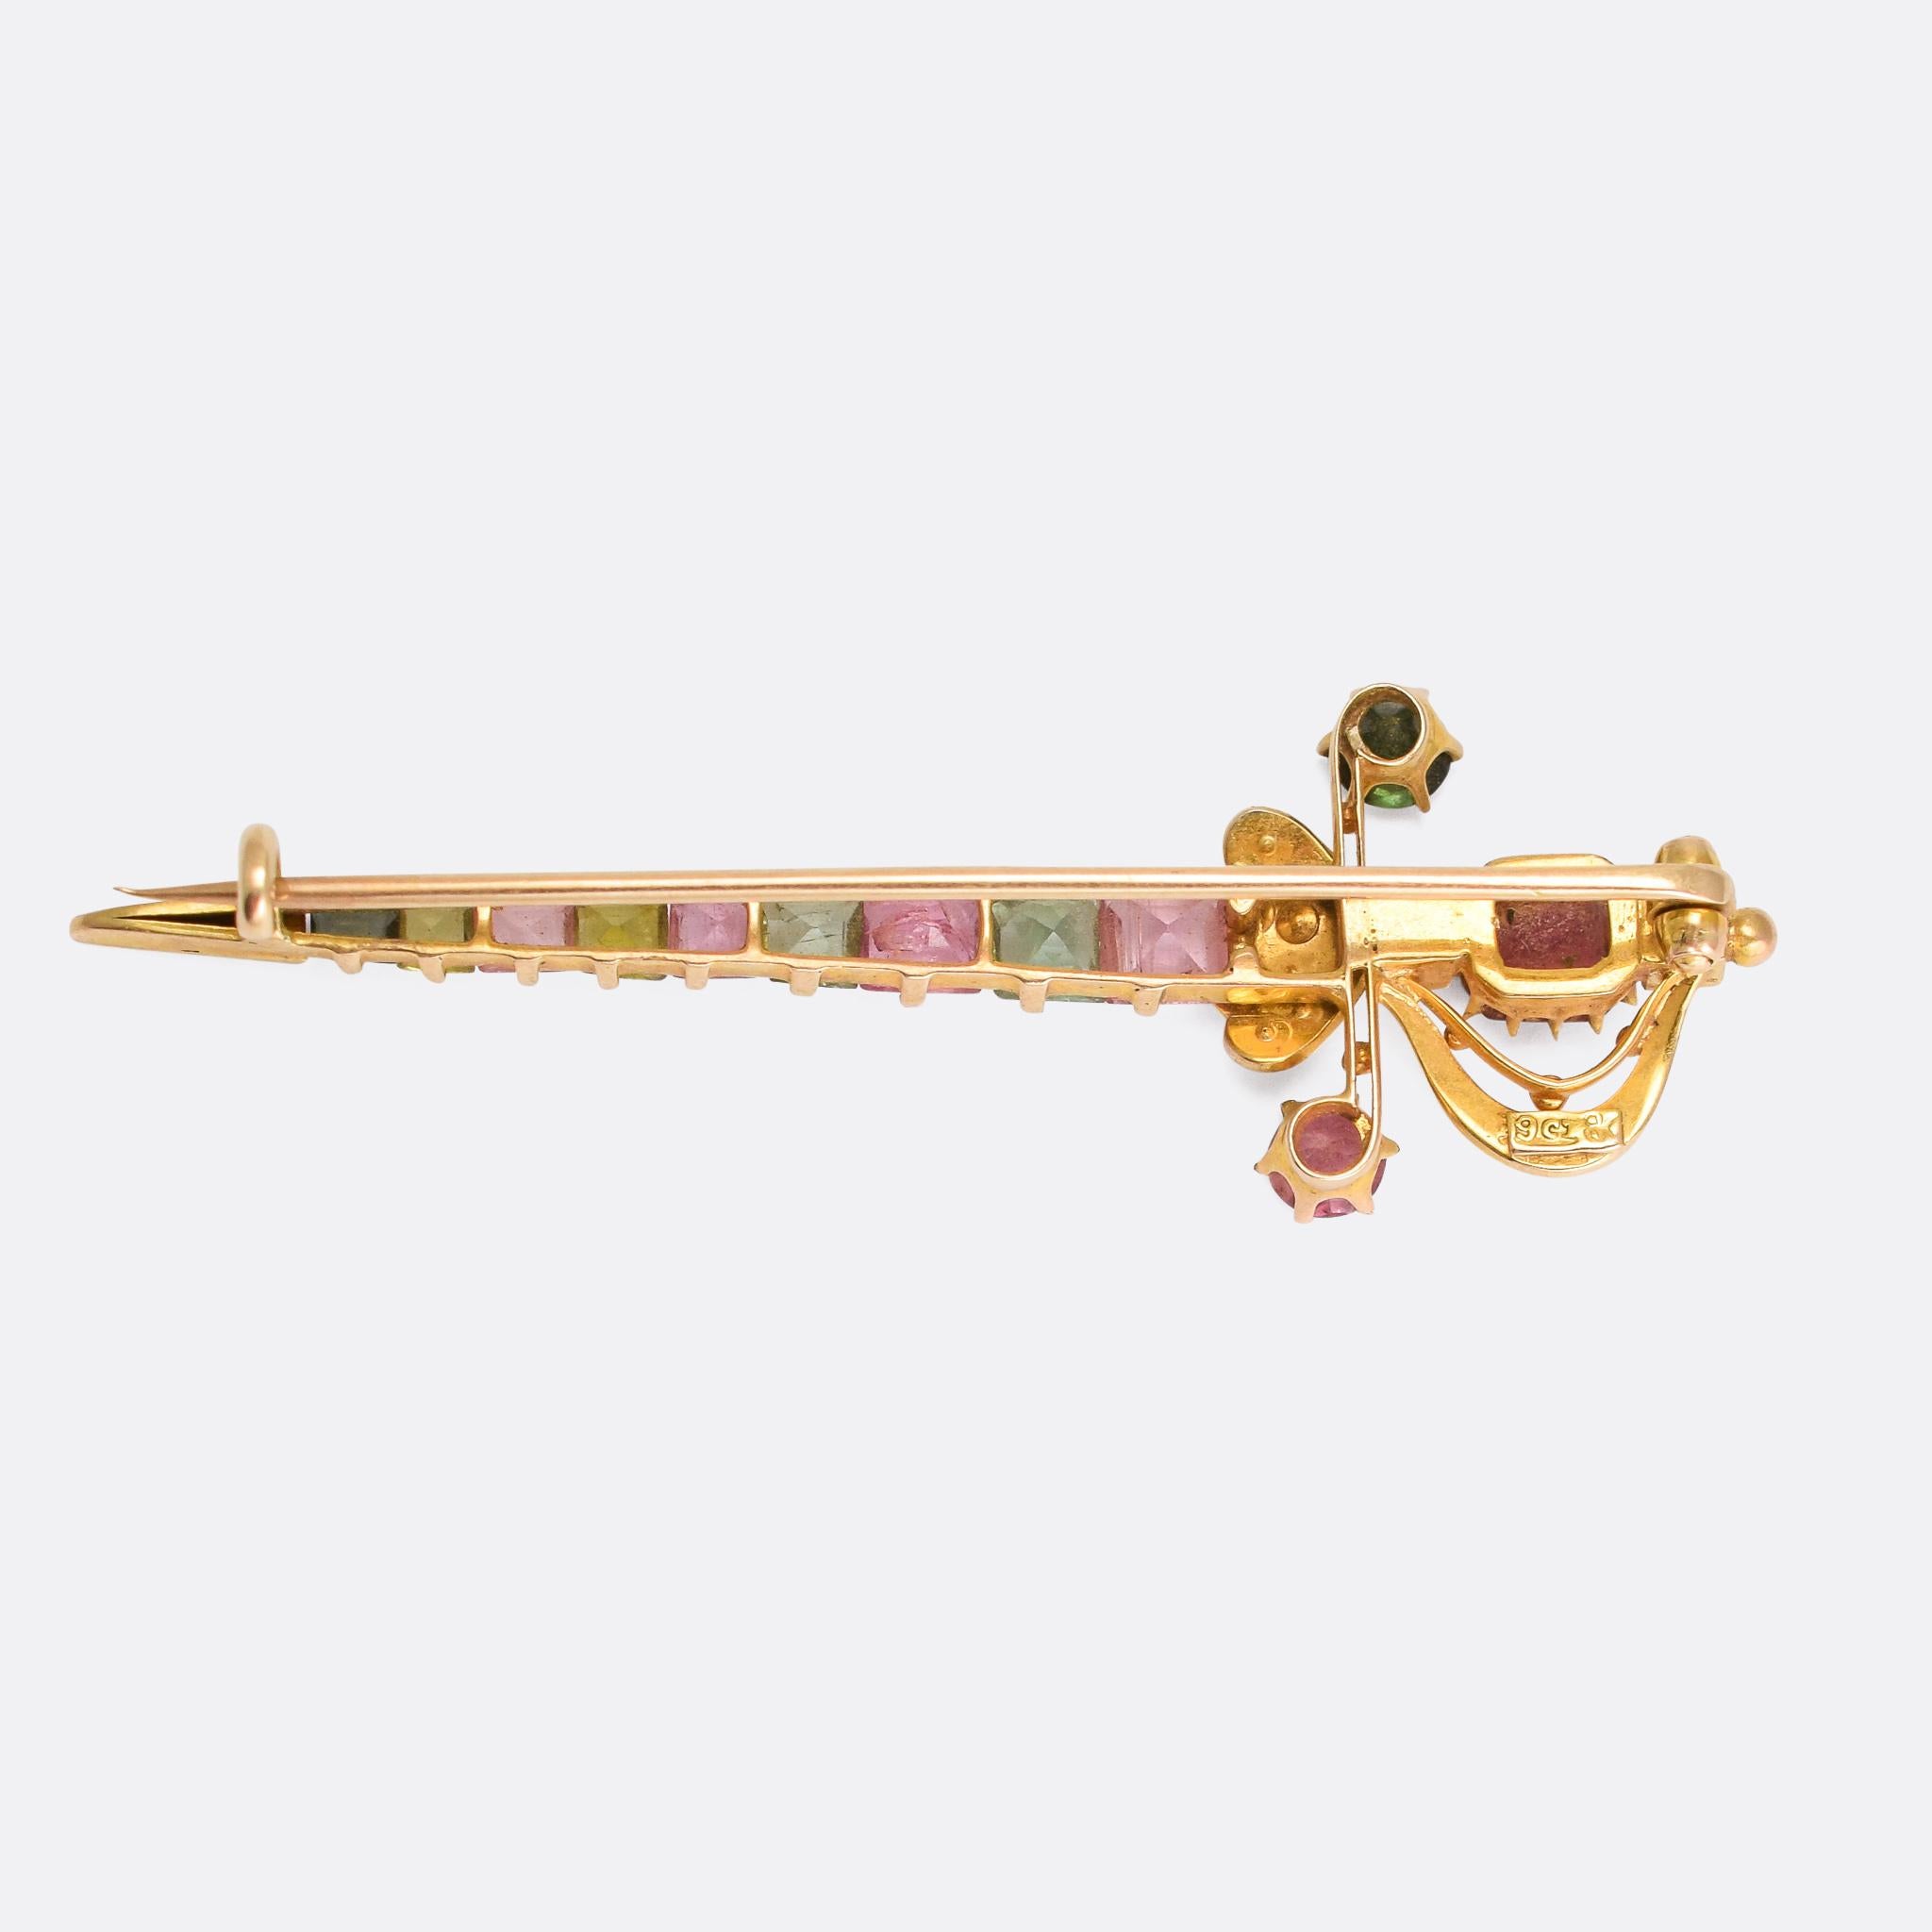 An incredible antique harlequin brooch modelled as a sword, and set with a colourful array of gemstones. The goldwork is exceptional, and the piece remains in excellent condition. Stones include pearl, topaz, tourmaline, peridot and spinel. The